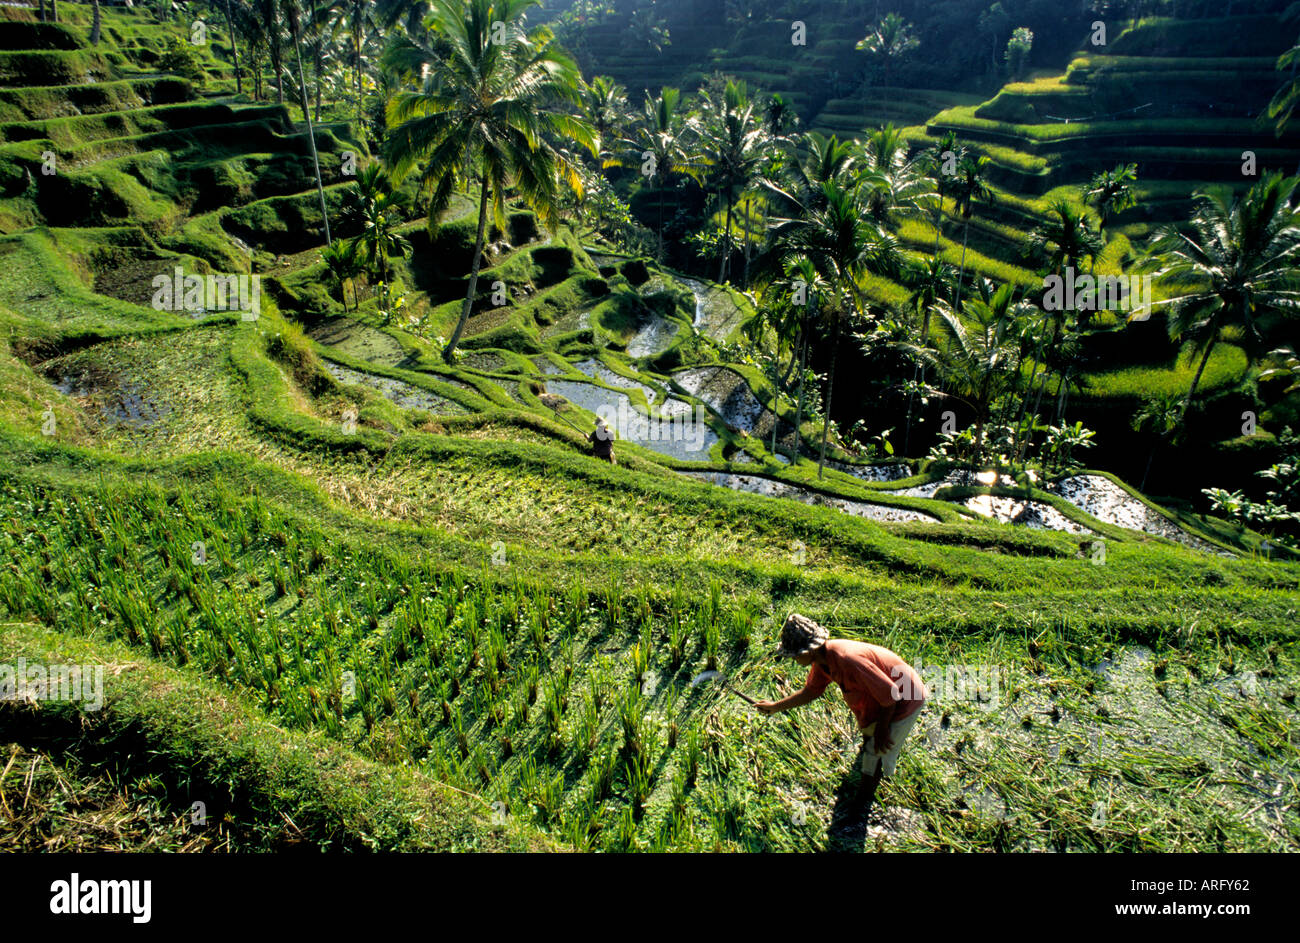 Bali Balinese rice paddy field cultivation water Stock Photo